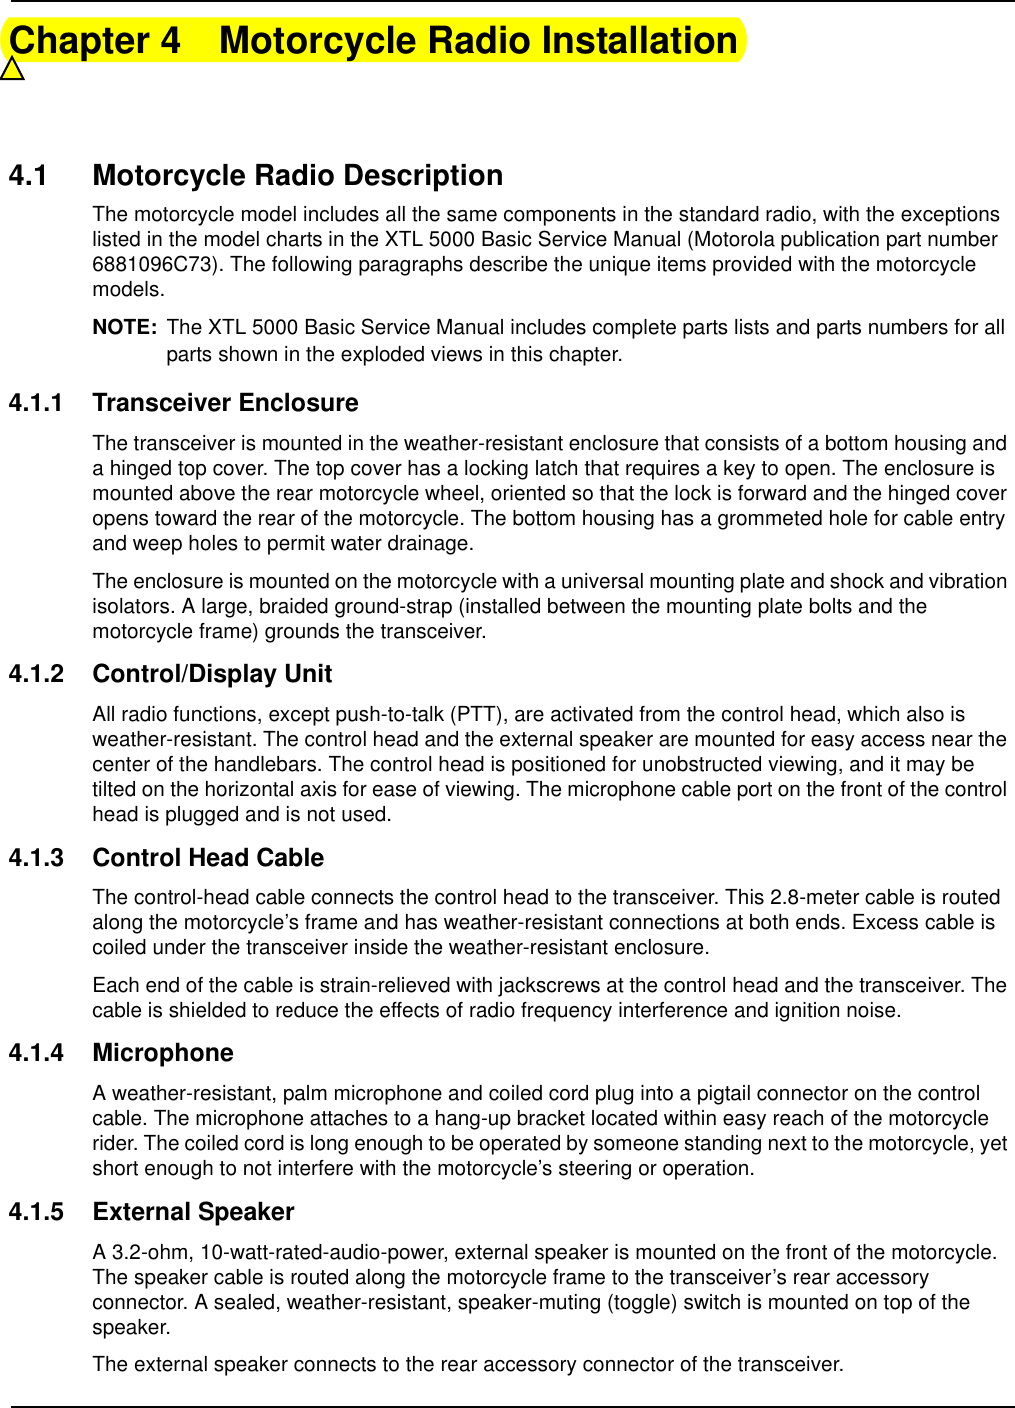 Chapter 4 Motorcycle Radio Installation4.1 Motorcycle Radio DescriptionThe motorcycle model includes all the same components in the standard radio, with the exceptions listed in the model charts in the XTL 5000 Basic Service Manual (Motorola publication part number 6881096C73). The following paragraphs describe the unique items provided with the motorcycle models. NOTE: The XTL 5000 Basic Service Manual includes complete parts lists and parts numbers for all parts shown in the exploded views in this chapter.4.1.1 Transceiver EnclosureThe transceiver is mounted in the weather-resistant enclosure that consists of a bottom housing and a hinged top cover. The top cover has a locking latch that requires a key to open. The enclosure is mounted above the rear motorcycle wheel, oriented so that the lock is forward and the hinged cover opens toward the rear of the motorcycle. The bottom housing has a grommeted hole for cable entry and weep holes to permit water drainage.The enclosure is mounted on the motorcycle with a universal mounting plate and shock and vibration isolators. A large, braided ground-strap (installed between the mounting plate bolts and the motorcycle frame) grounds the transceiver.4.1.2 Control/Display UnitAll radio functions, except push-to-talk (PTT), are activated from the control head, which also is weather-resistant. The control head and the external speaker are mounted for easy access near the center of the handlebars. The control head is positioned for unobstructed viewing, and it may be tilted on the horizontal axis for ease of viewing. The microphone cable port on the front of the control head is plugged and is not used. 4.1.3 Control Head CableThe control-head cable connects the control head to the transceiver. This 2.8-meter cable is routed along the motorcycle’s frame and has weather-resistant connections at both ends. Excess cable is coiled under the transceiver inside the weather-resistant enclosure.Each end of the cable is strain-relieved with jackscrews at the control head and the transceiver. The cable is shielded to reduce the effects of radio frequency interference and ignition noise.4.1.4 MicrophoneA weather-resistant, palm microphone and coiled cord plug into a pigtail connector on the control cable. The microphone attaches to a hang-up bracket located within easy reach of the motorcycle rider. The coiled cord is long enough to be operated by someone standing next to the motorcycle, yet short enough to not interfere with the motorcycle’s steering or operation.4.1.5 External SpeakerA 3.2-ohm, 10-watt-rated-audio-power, external speaker is mounted on the front of the motorcycle. The speaker cable is routed along the motorcycle frame to the transceiver’s rear accessory connector. A sealed, weather-resistant, speaker-muting (toggle) switch is mounted on top of the speaker.The external speaker connects to the rear accessory connector of the transceiver.